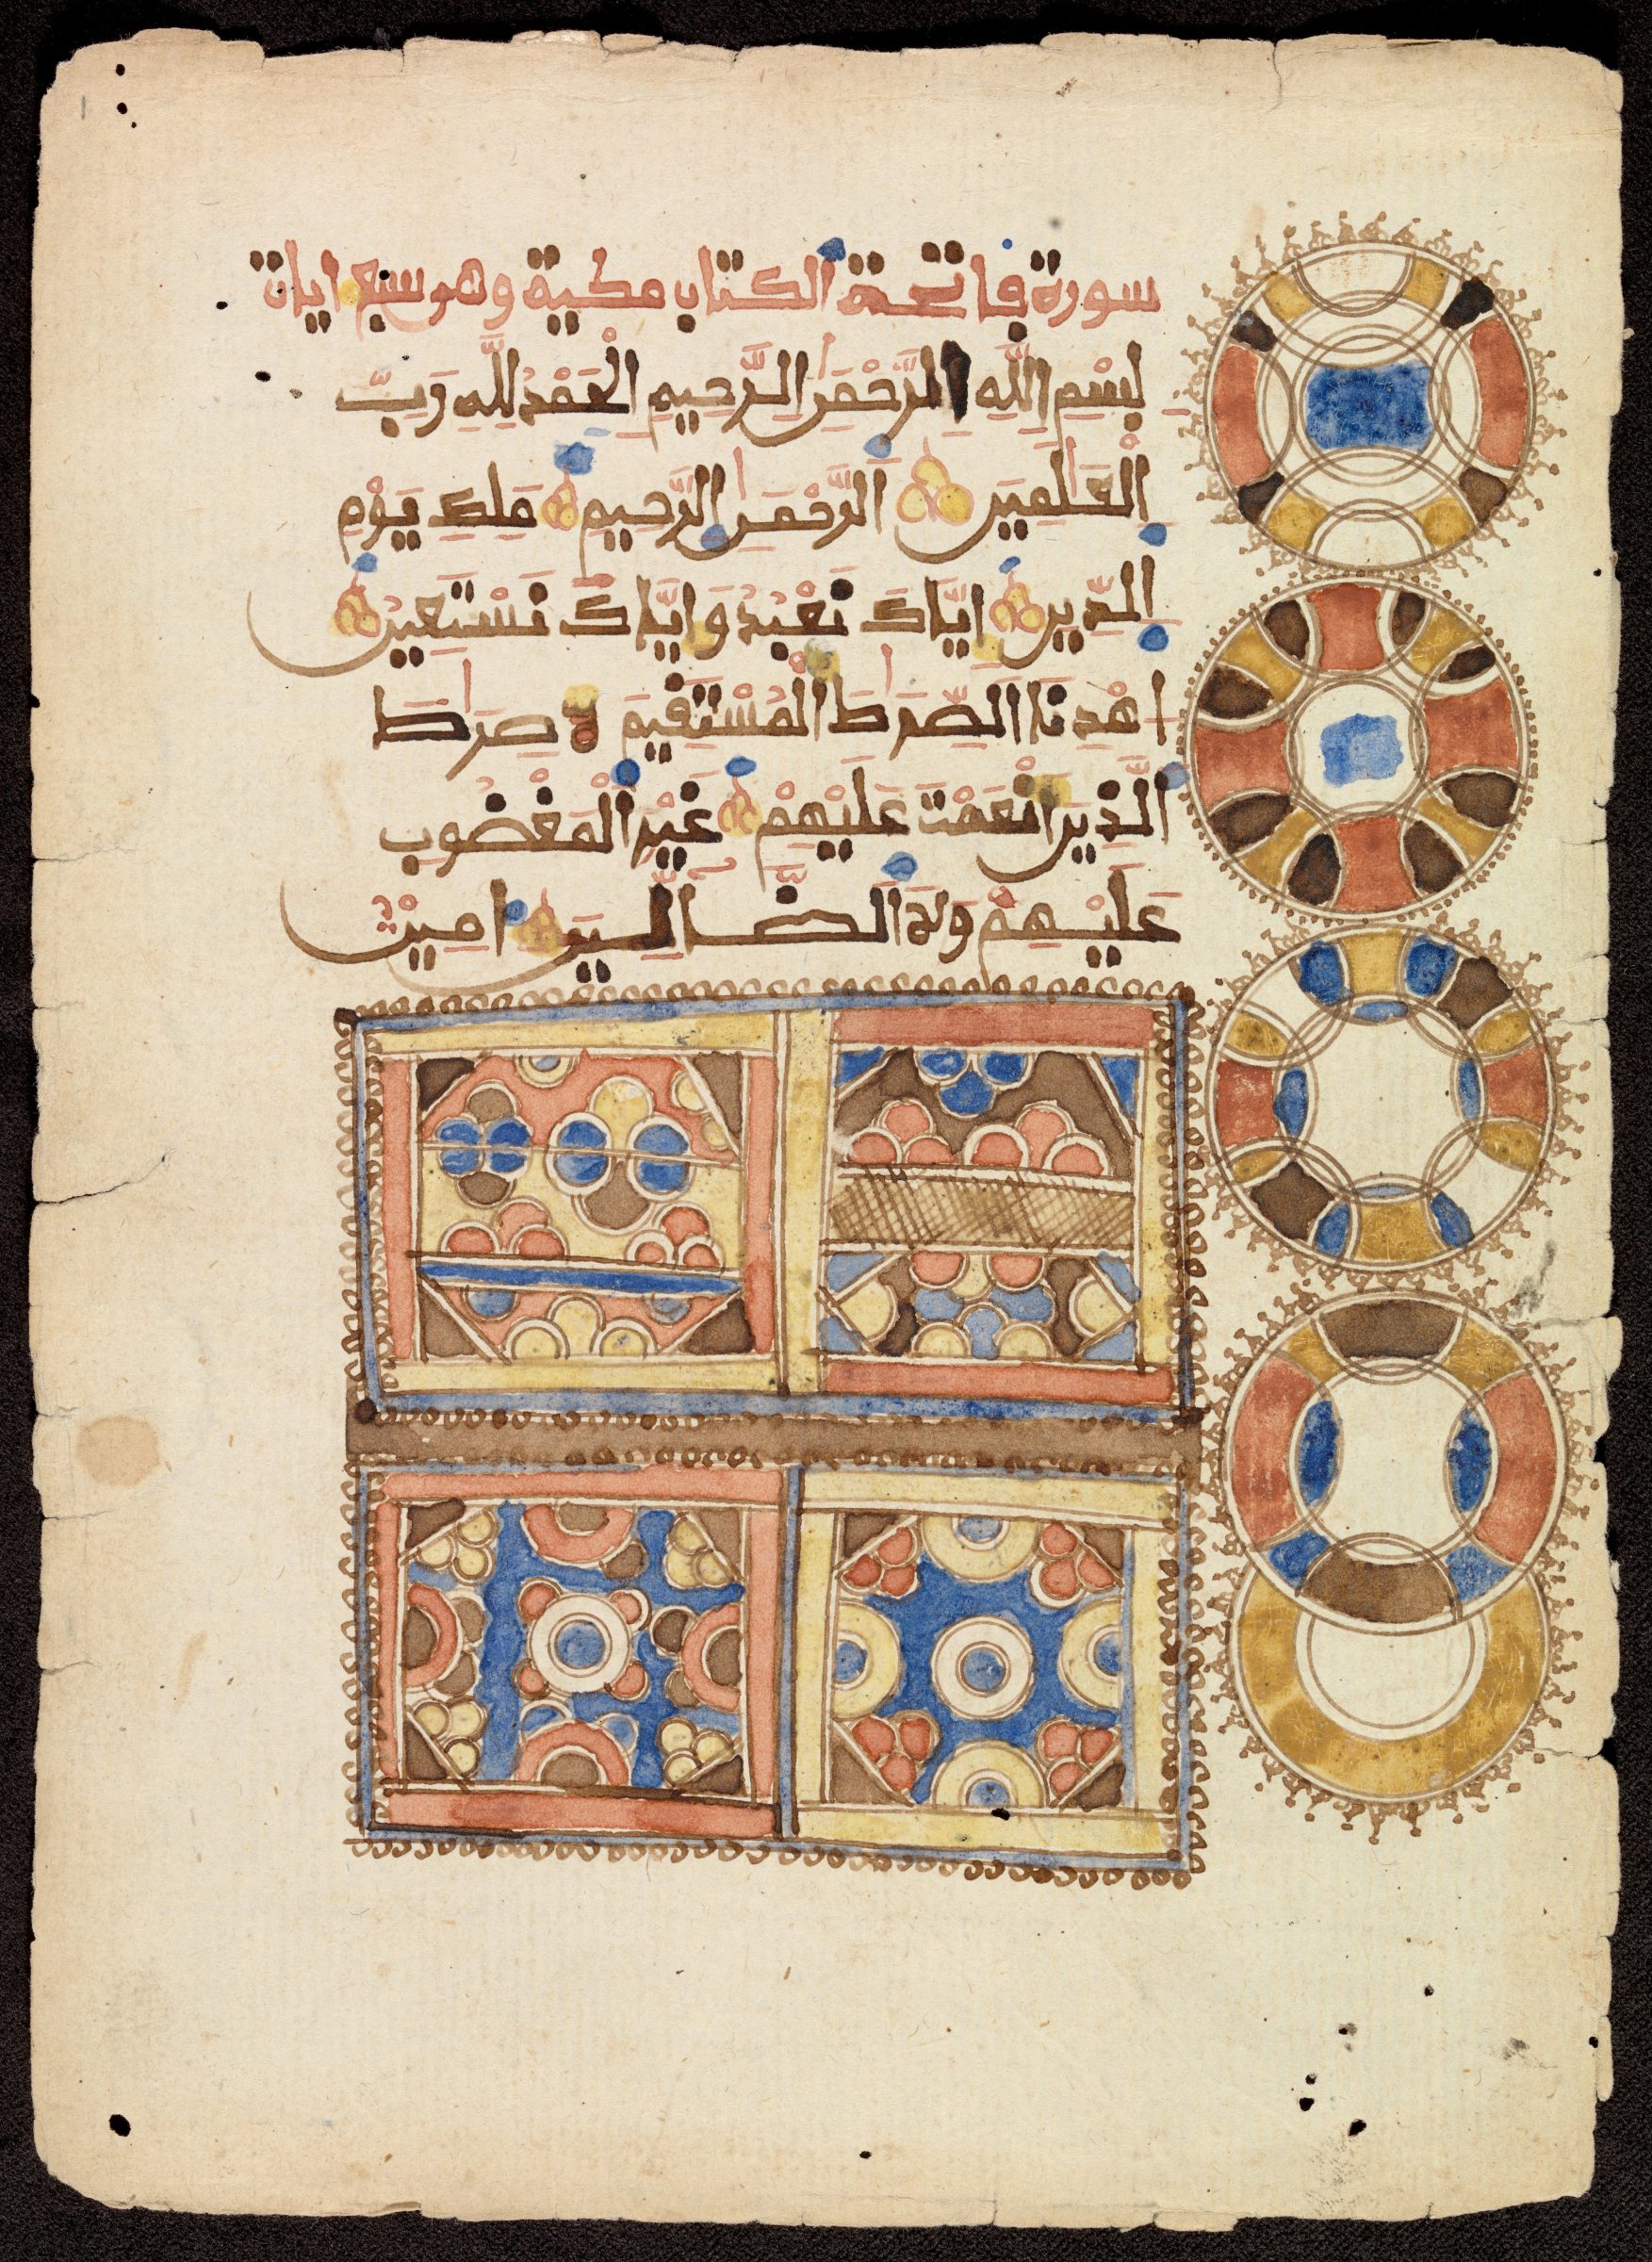 A 19th century script of the opening verse of the Qur'an written in the Sudani Script